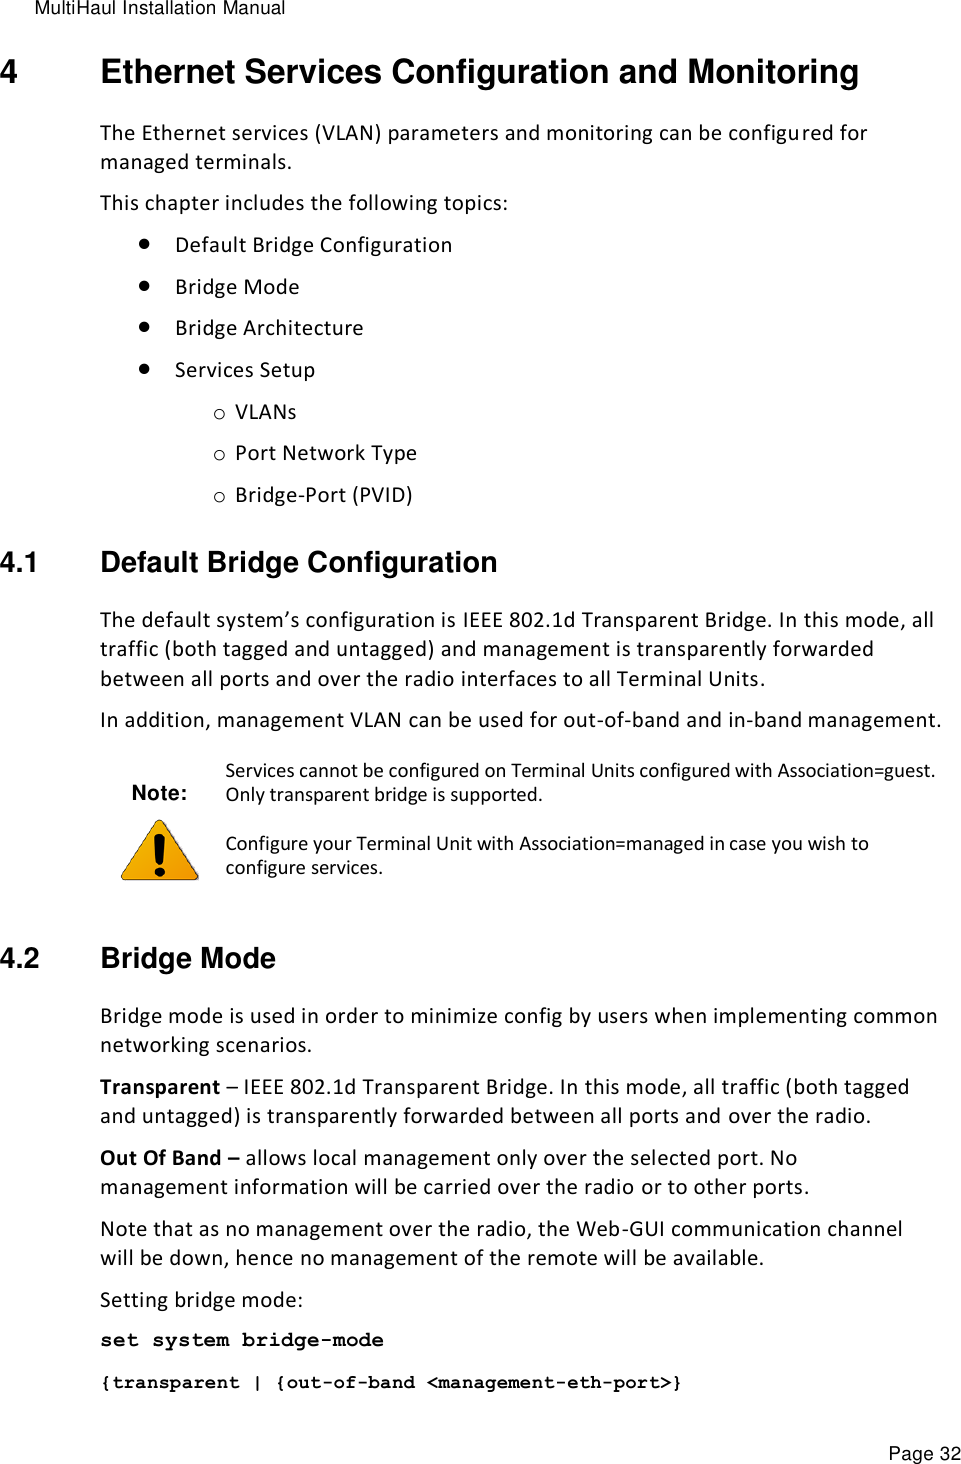 MultiHaul Installation Manual Page 32 4  Ethernet Services Configuration and Monitoring The Ethernet services (VLAN) parameters and monitoring can be configured for managed terminals. This chapter includes the following topics:  Default Bridge Configuration  Bridge Mode  Bridge Architecture  Services Setup o VLANs o Port Network Type o Bridge-Port (PVID) 4.1  Default Bridge Configuration The default system’s configuration is IEEE 802.1d Transparent Bridge. In this mode, all traffic (both tagged and untagged) and management is transparently forwarded between all ports and over the radio interfaces to all Terminal Units. In addition, management VLAN can be used for out-of-band and in-band management. Note:  Services cannot be configured on Terminal Units configured with Association=guest. Only transparent bridge is supported. Configure your Terminal Unit with Association=managed in case you wish to configure services. 4.2  Bridge Mode Bridge mode is used in order to minimize config by users when implementing common networking scenarios. Transparent – IEEE 802.1d Transparent Bridge. In this mode, all traffic (both tagged and untagged) is transparently forwarded between all ports and over the radio. Out Of Band – allows local management only over the selected port. No management information will be carried over the radio or to other ports. Note that as no management over the radio, the Web-GUI communication channel will be down, hence no management of the remote will be available. Setting bridge mode: set system bridge-mode {transparent | {out-of-band &lt;management-eth-port&gt;} 